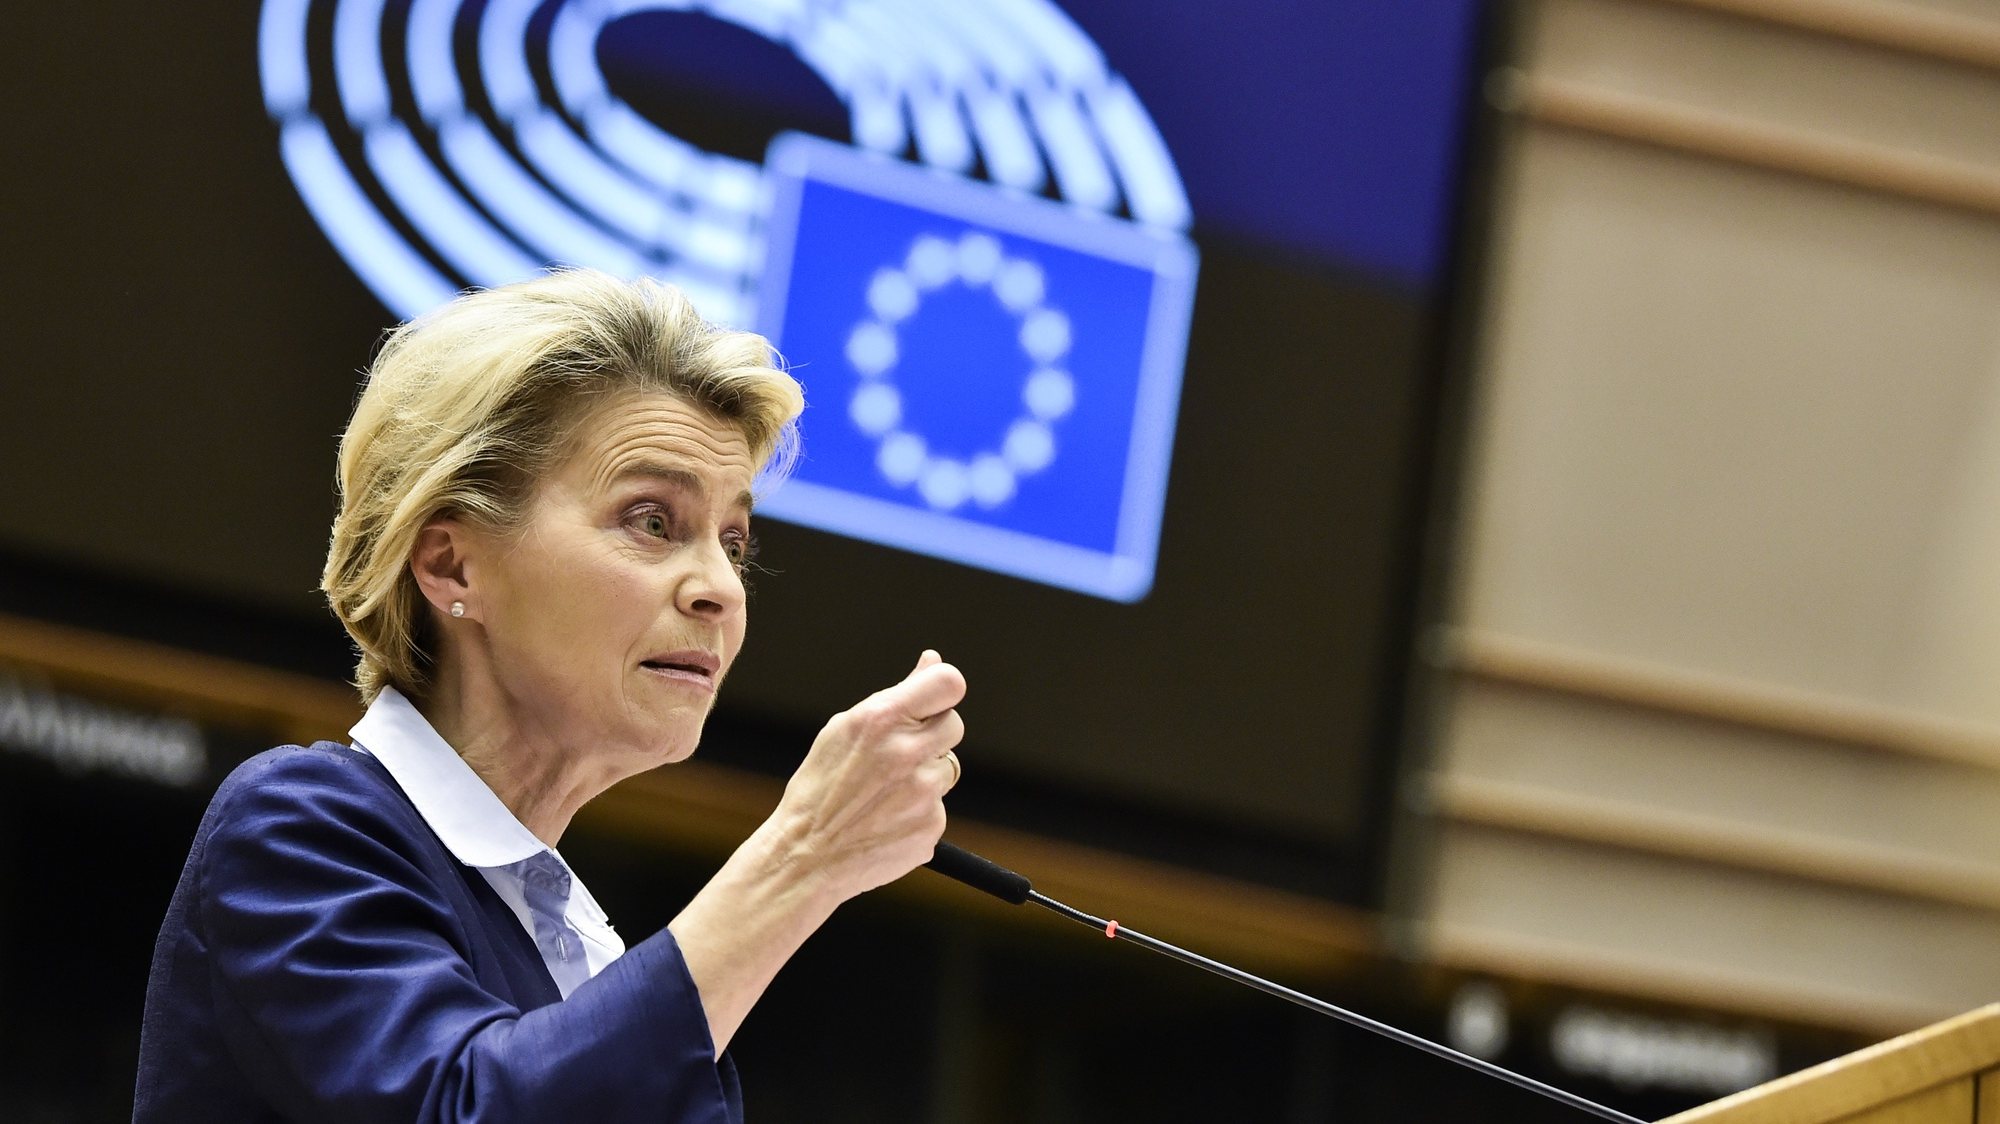 epa08887088 President of Commission Ursula von der Leyen delivers a speech during a session at European Parliament, in Brussels, Belgium, 16 December 2020.  EPA/JOHN THYS / POOL